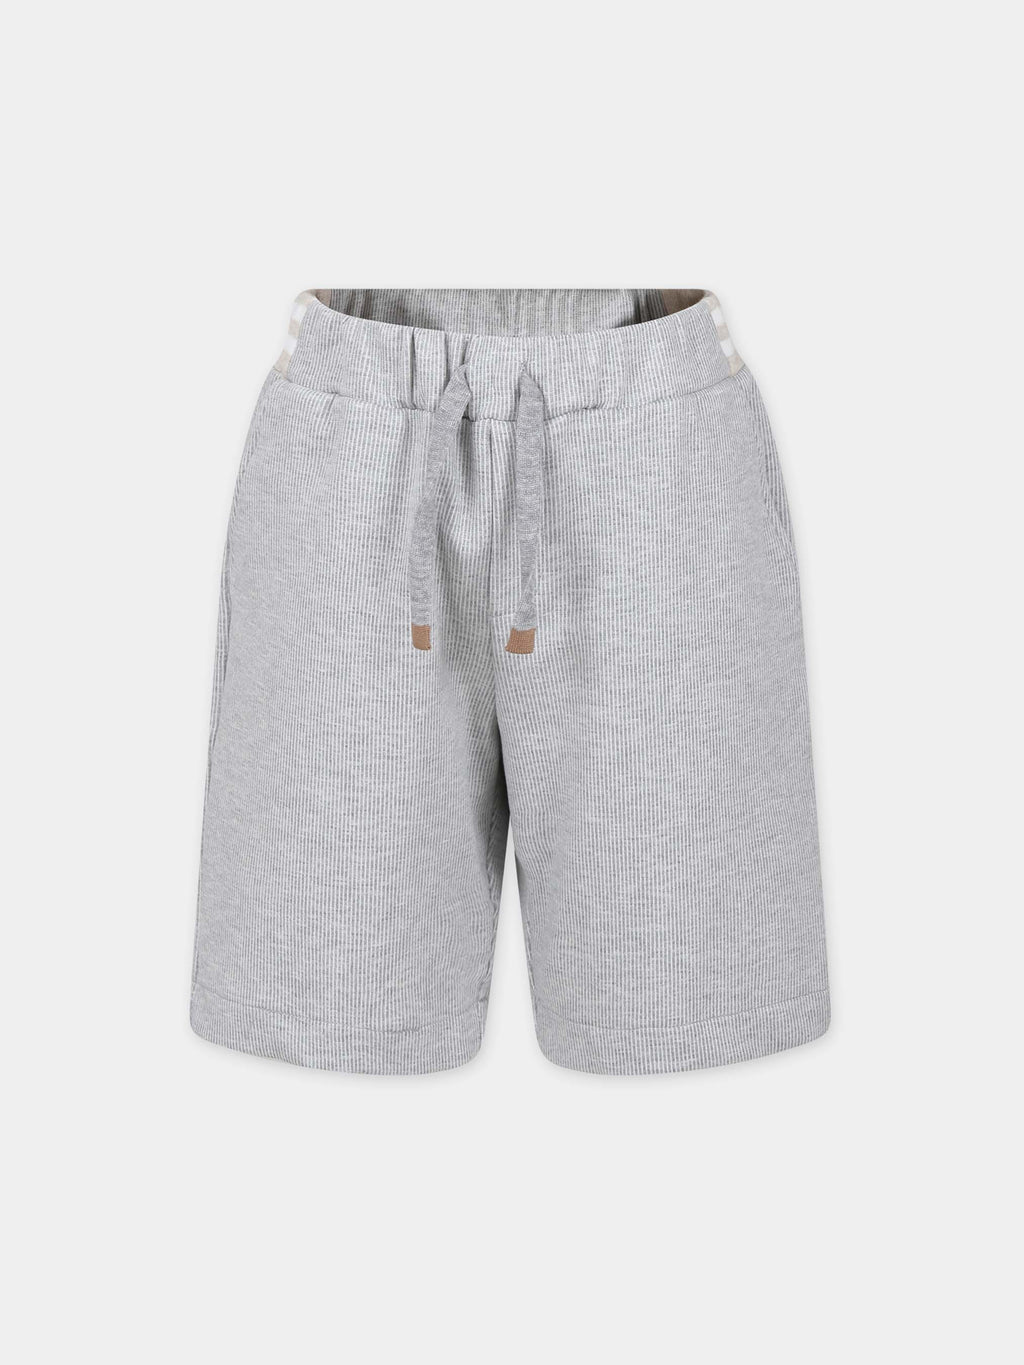 Grey shorts for boy with logo